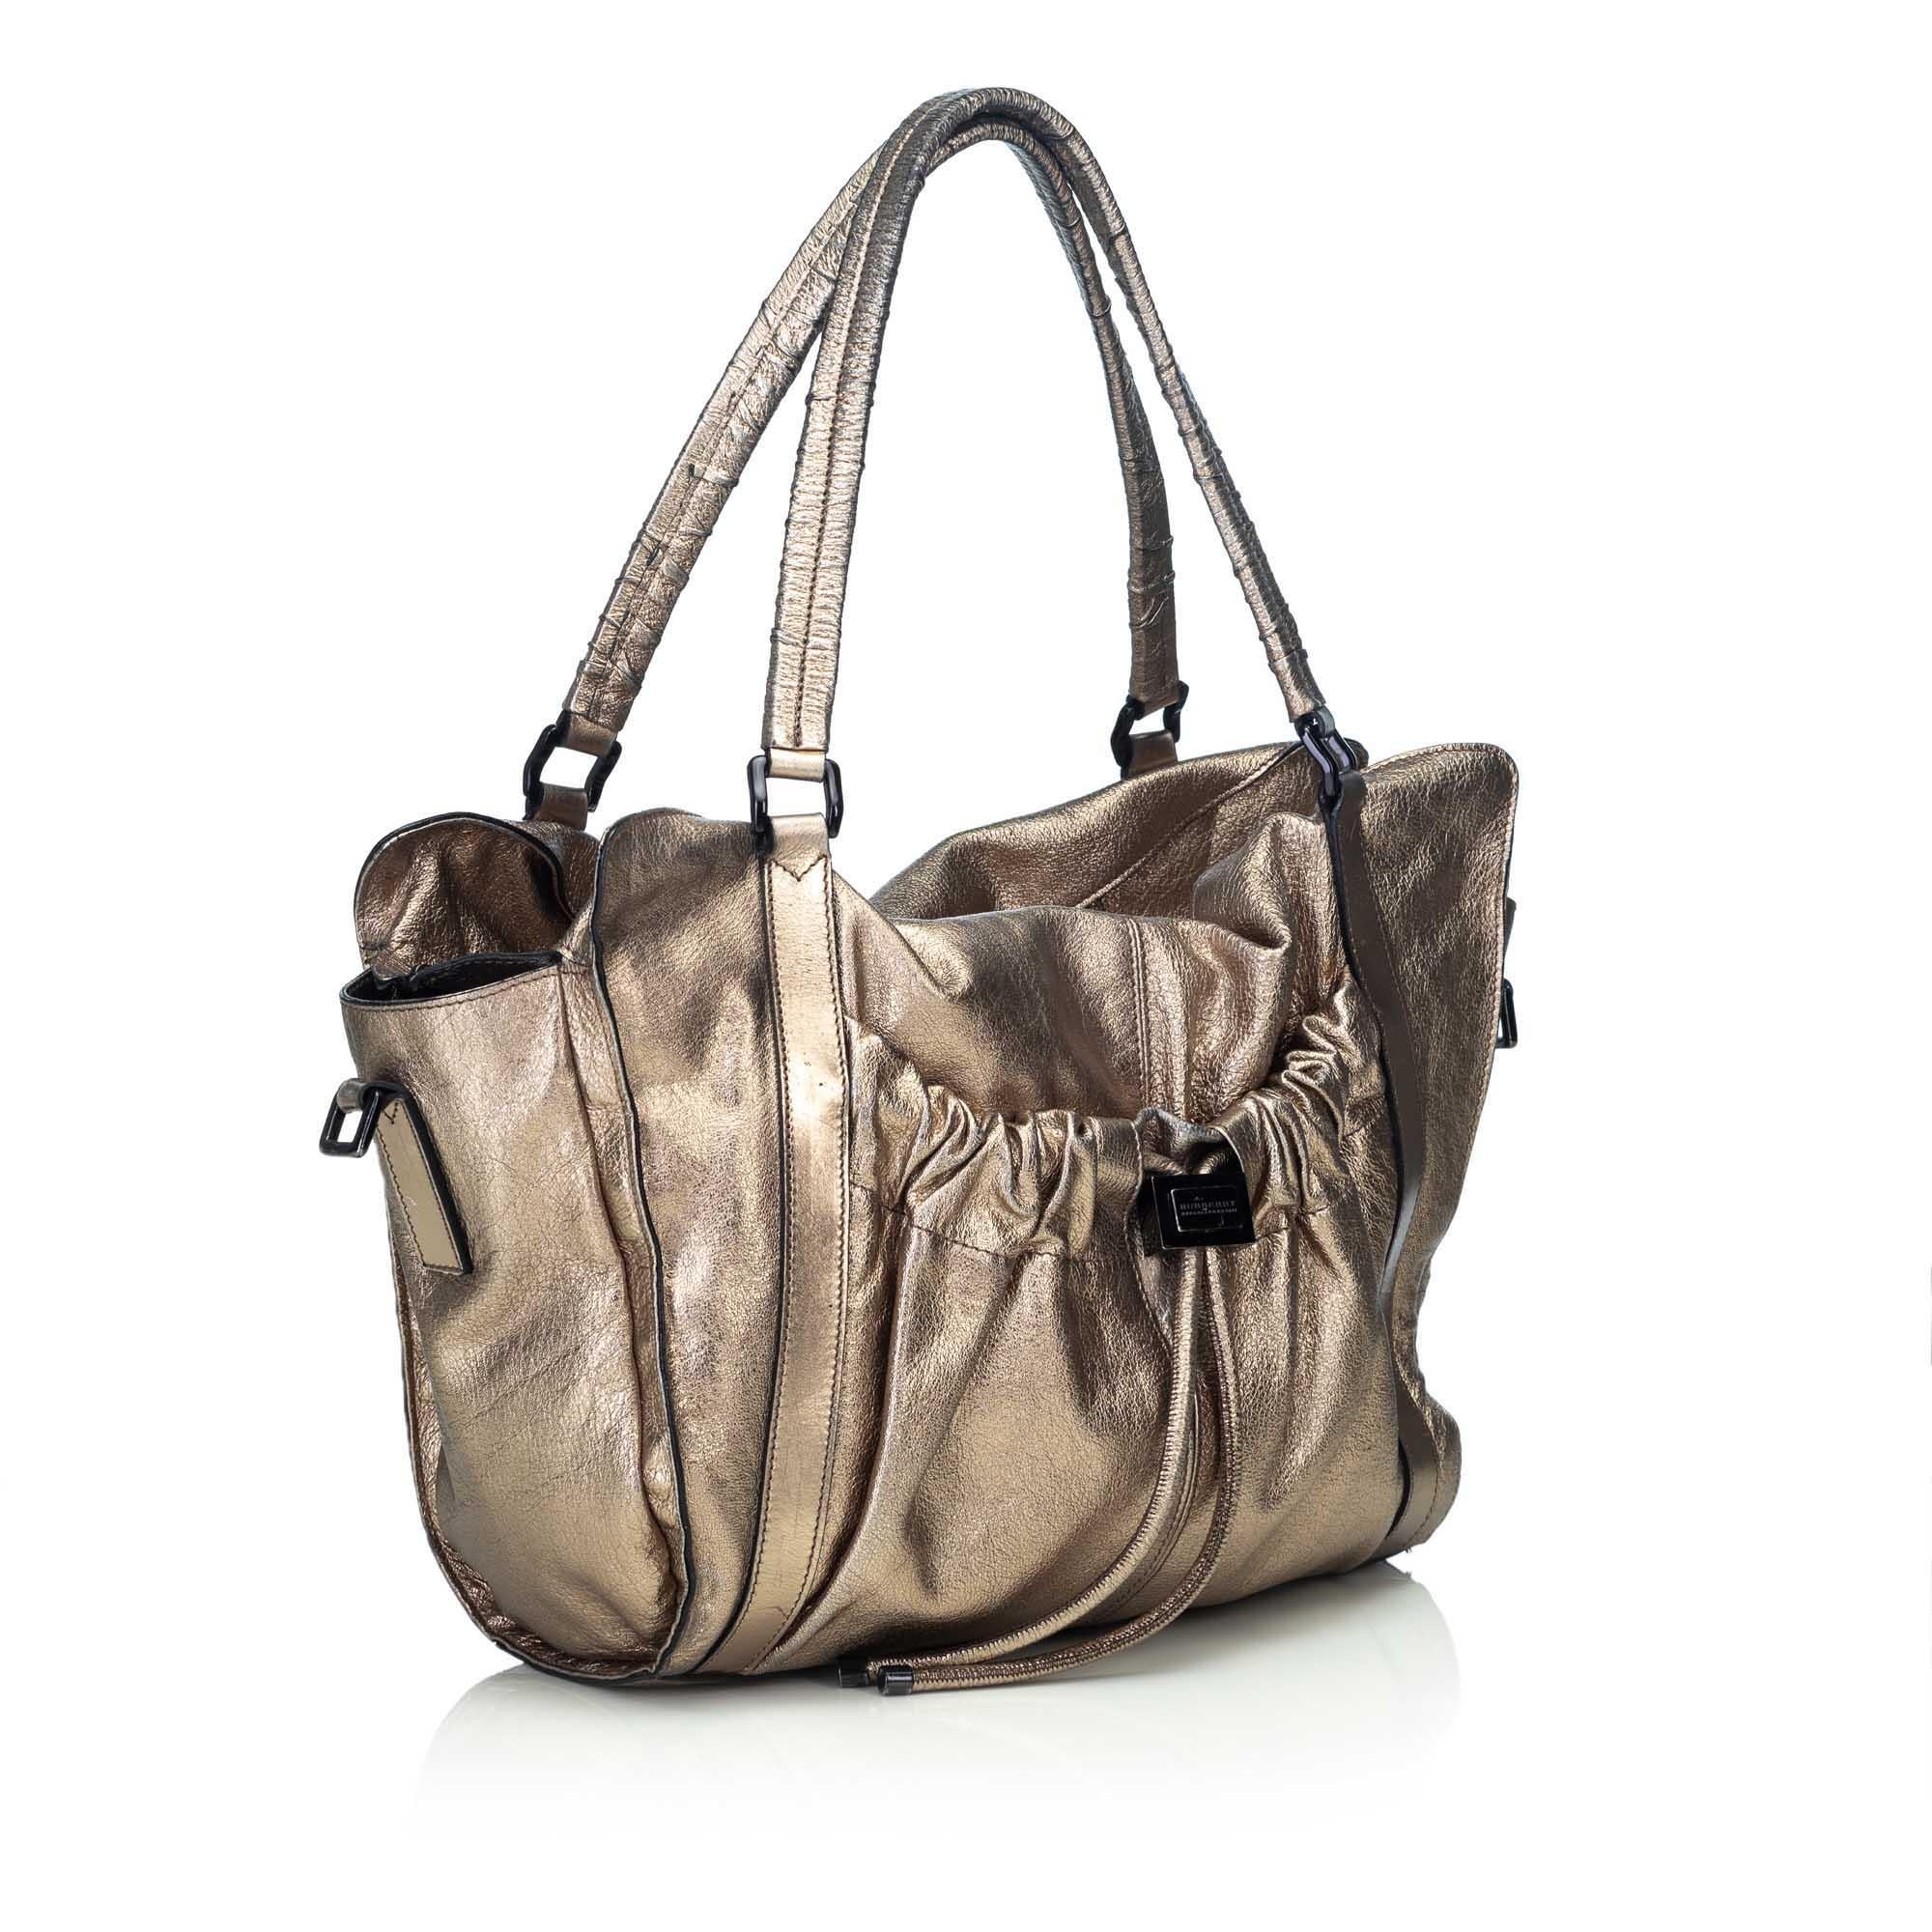 This satchel features a metallic leather body, a front exterior slip pocket with drawstring closure, flat leather strap, a detachable leather strap, a top zip closure, and an interior slip pocket. It carries as B condition rating.

Inclusions: 
This